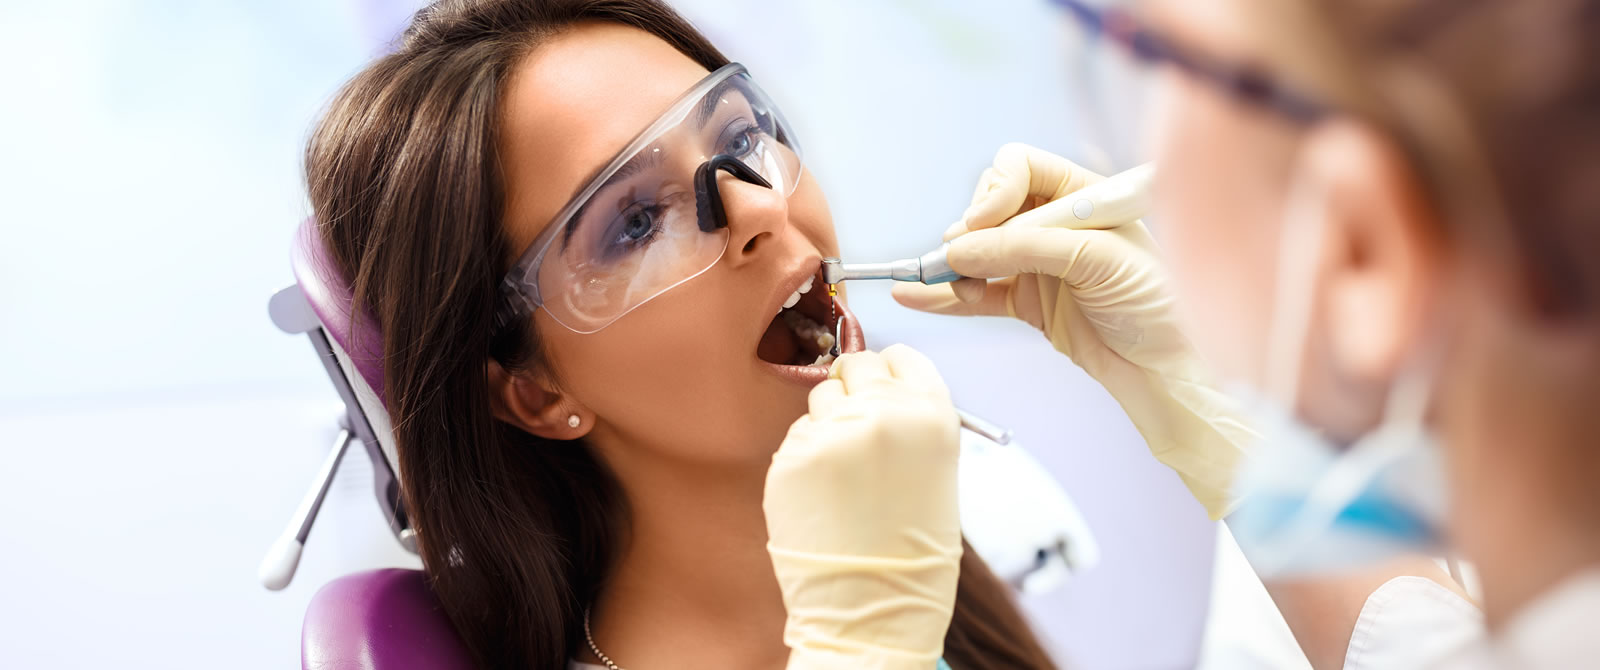 root canal specialist nj